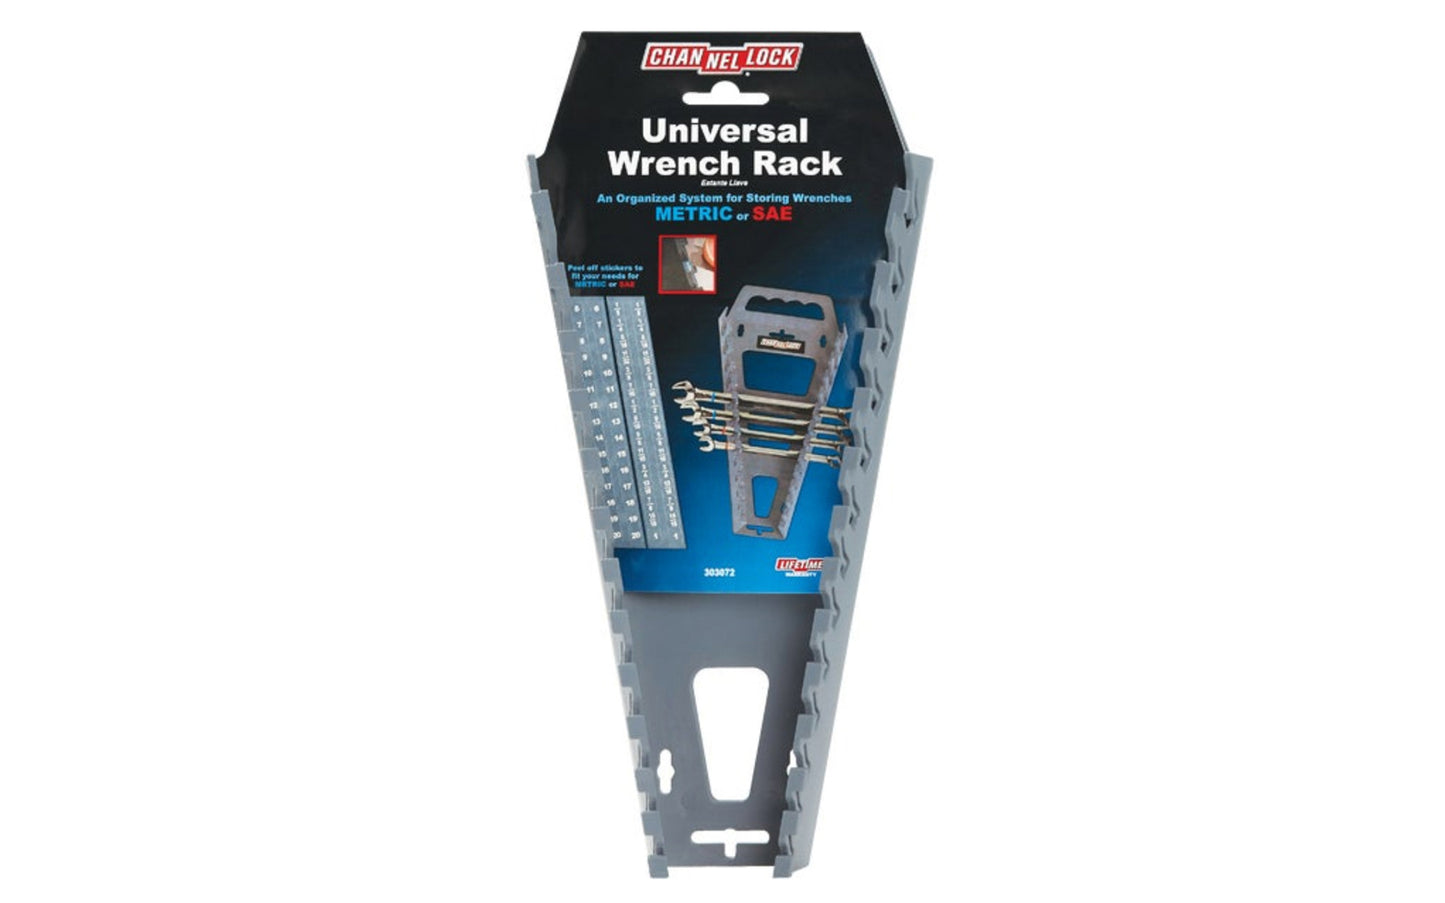 Channellock Universal Wrench Rack. Tough universal combination wrench rack holds 13 wrenches. Includes SAE 1/8" to 1" and Metric 6 mm to 20 mm peel off labels for easy customization. Spring tabs can also be trimmed to custom fit extra thick wrenches.